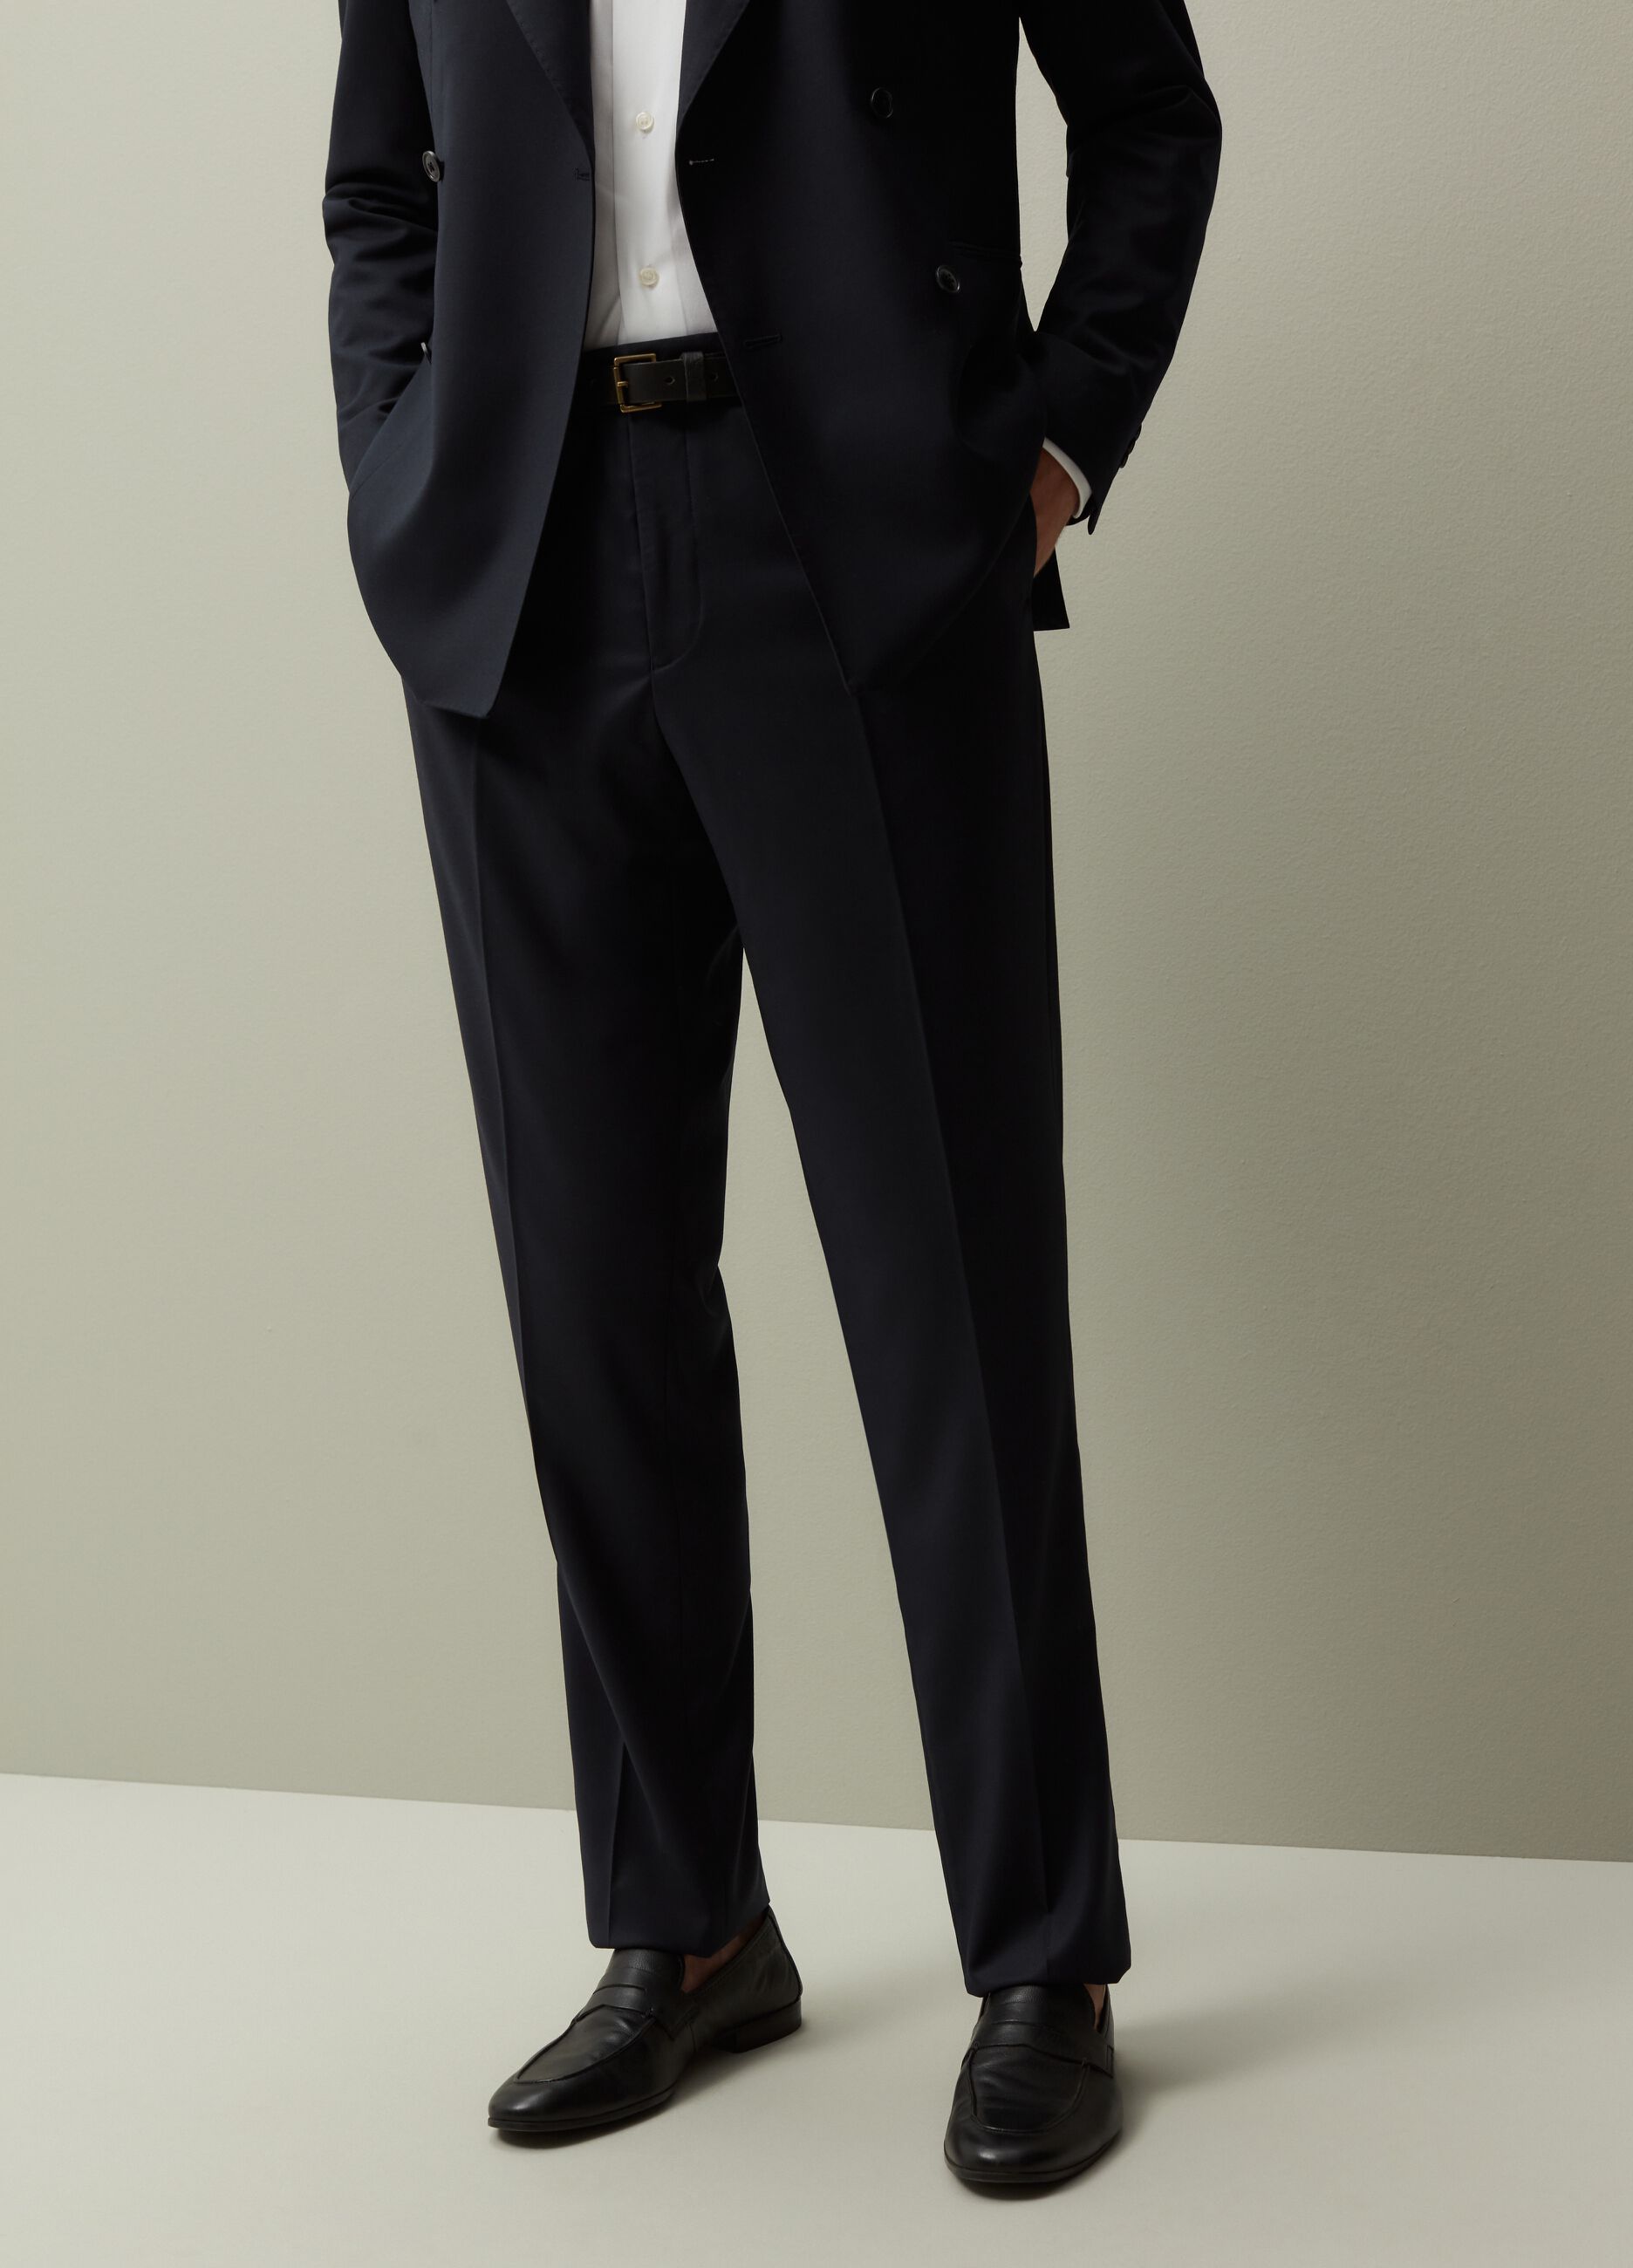 Regular-fit navy blue formal trousers